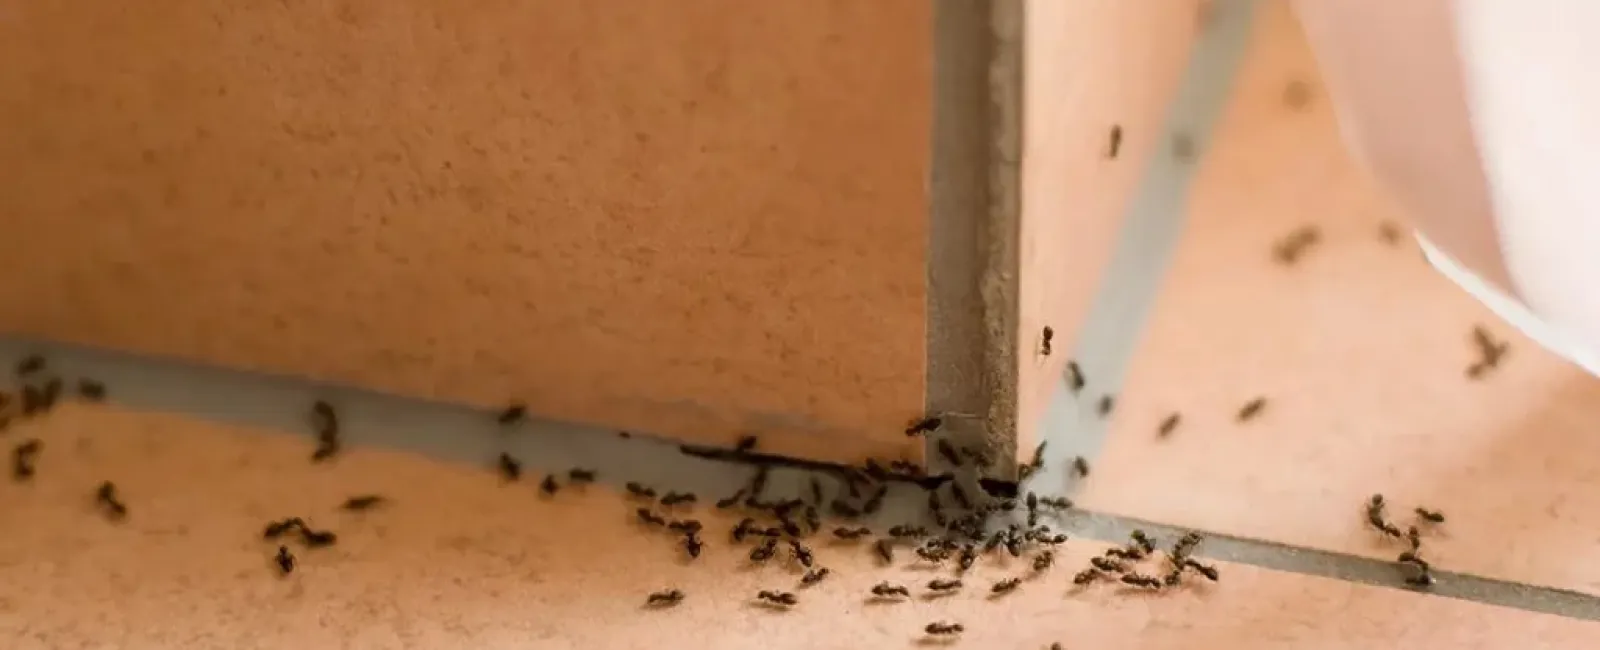 a group of ants on a wall